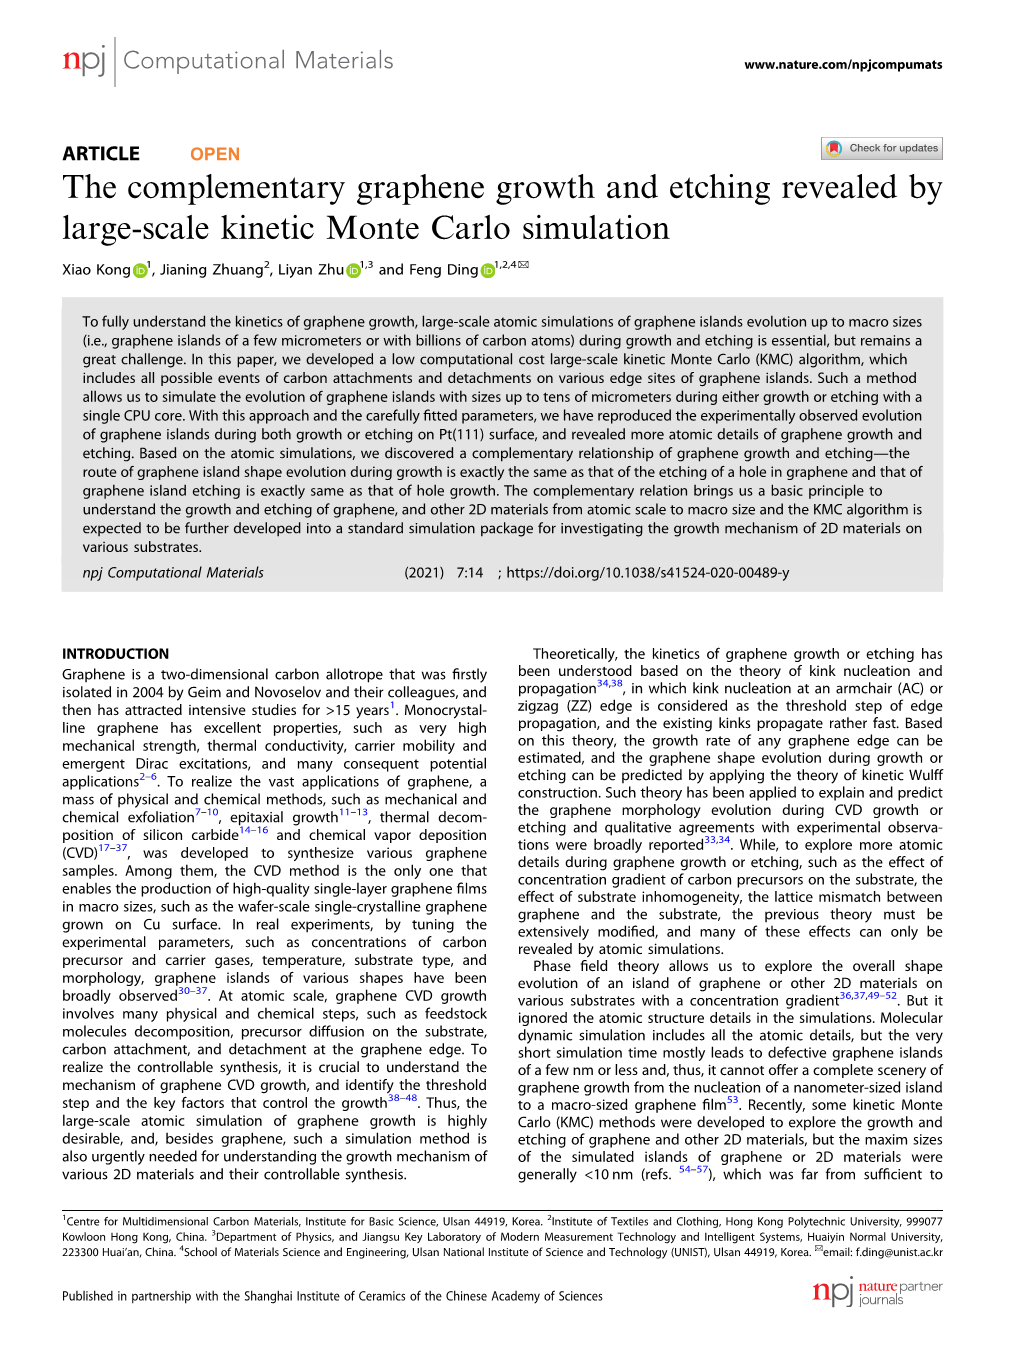 The Complementary Graphene Growth and Etching Revealed by Large-Scale Kinetic Monte Carlo Simulation ✉ Xiao Kong 1, Jianing Zhuang2, Liyan Zhu 1,3 and Feng Ding 1,2,4